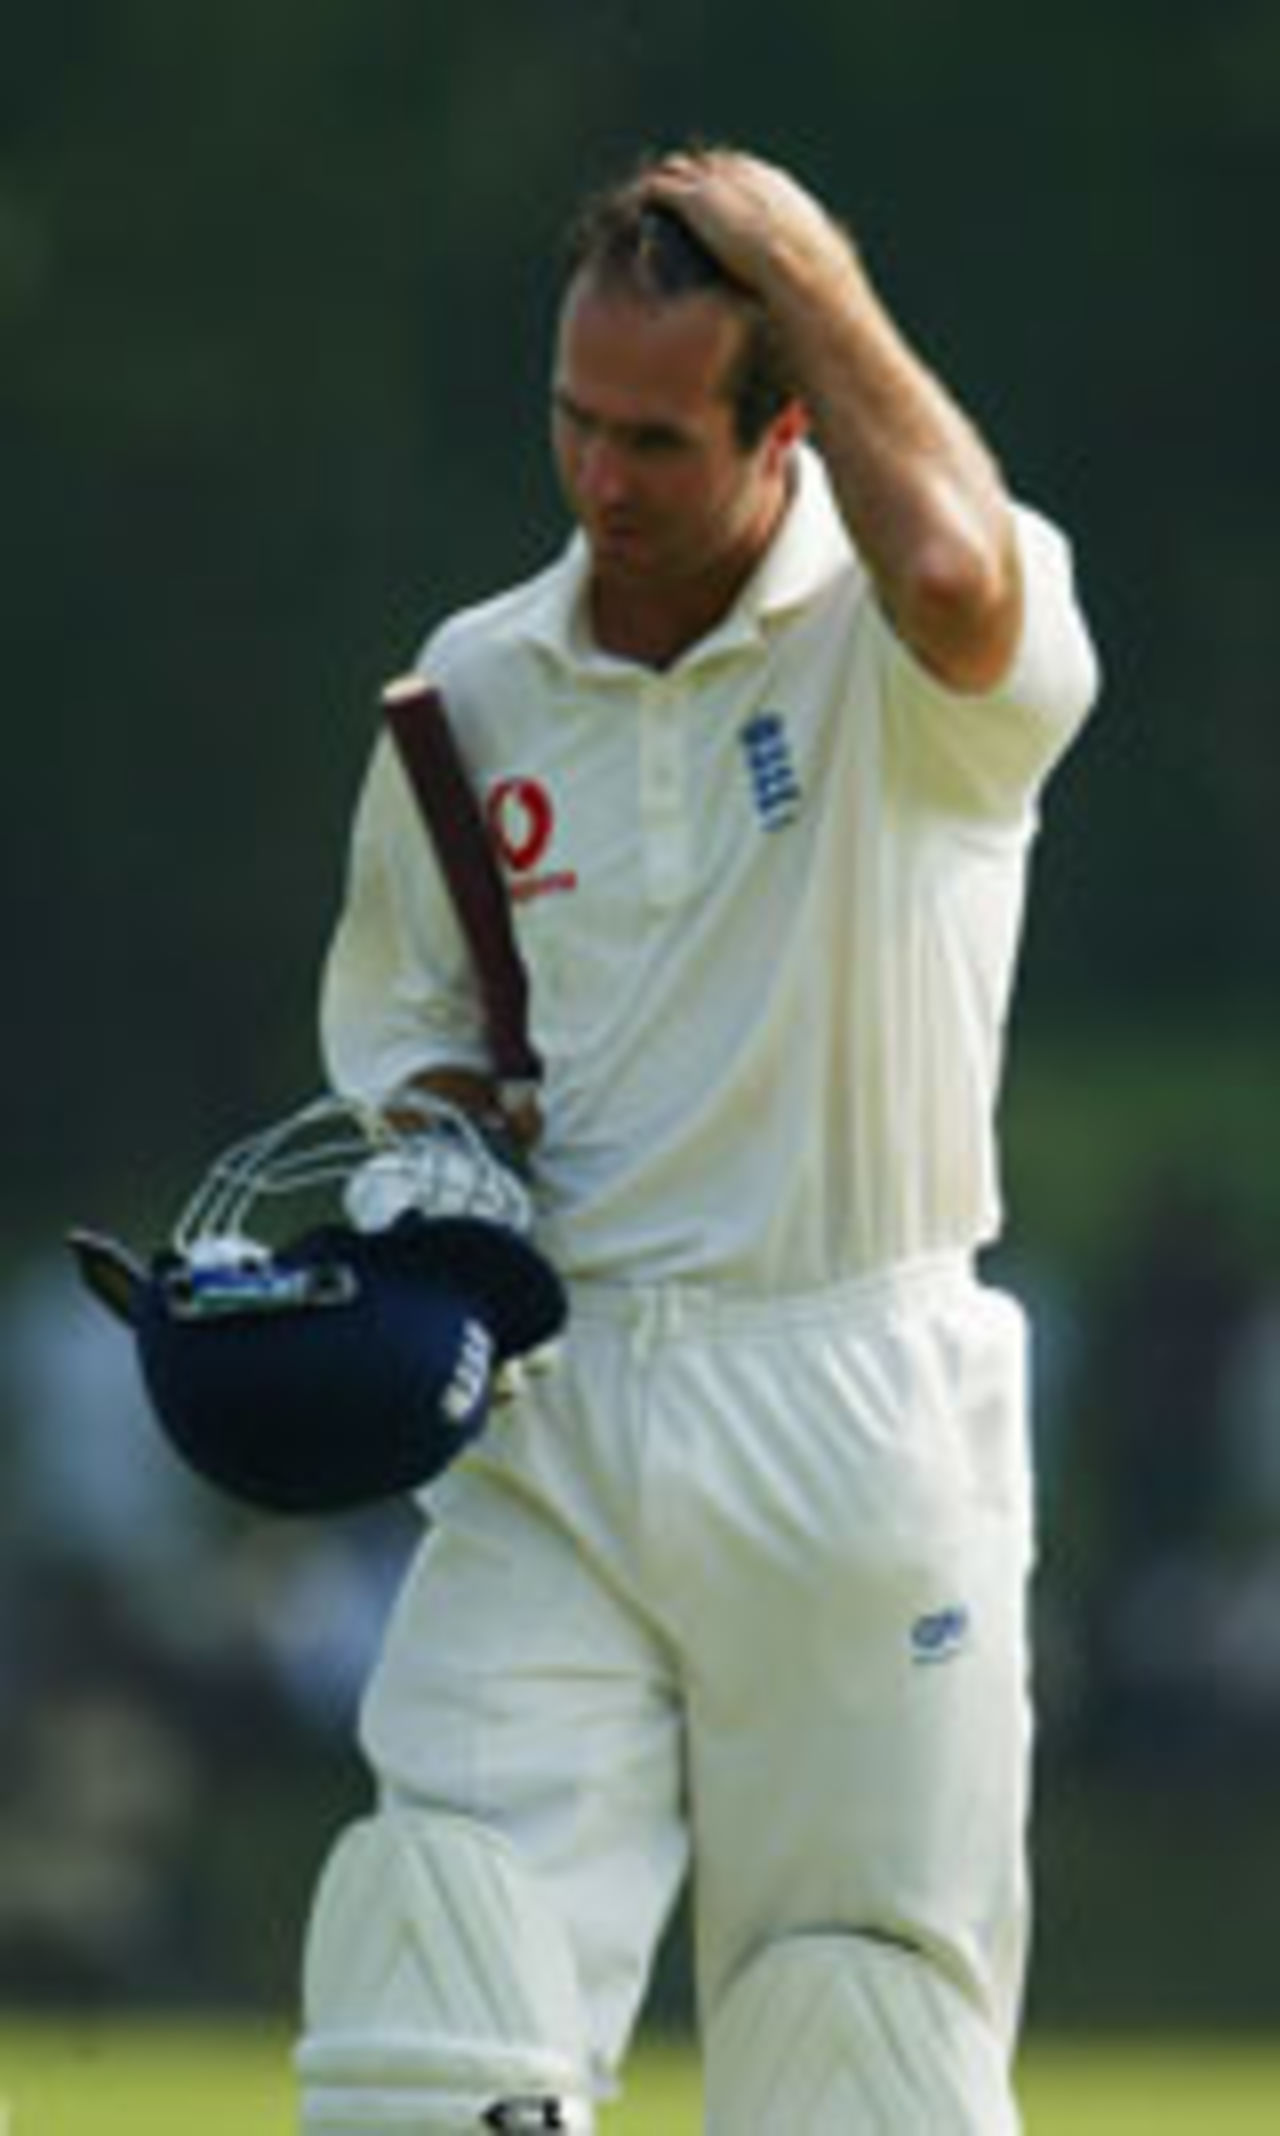 Michael Vaughan trudges off after being trapped lbw for 1, Bang A v Eng, 2nd Day, Dhaka, October 17, 2003